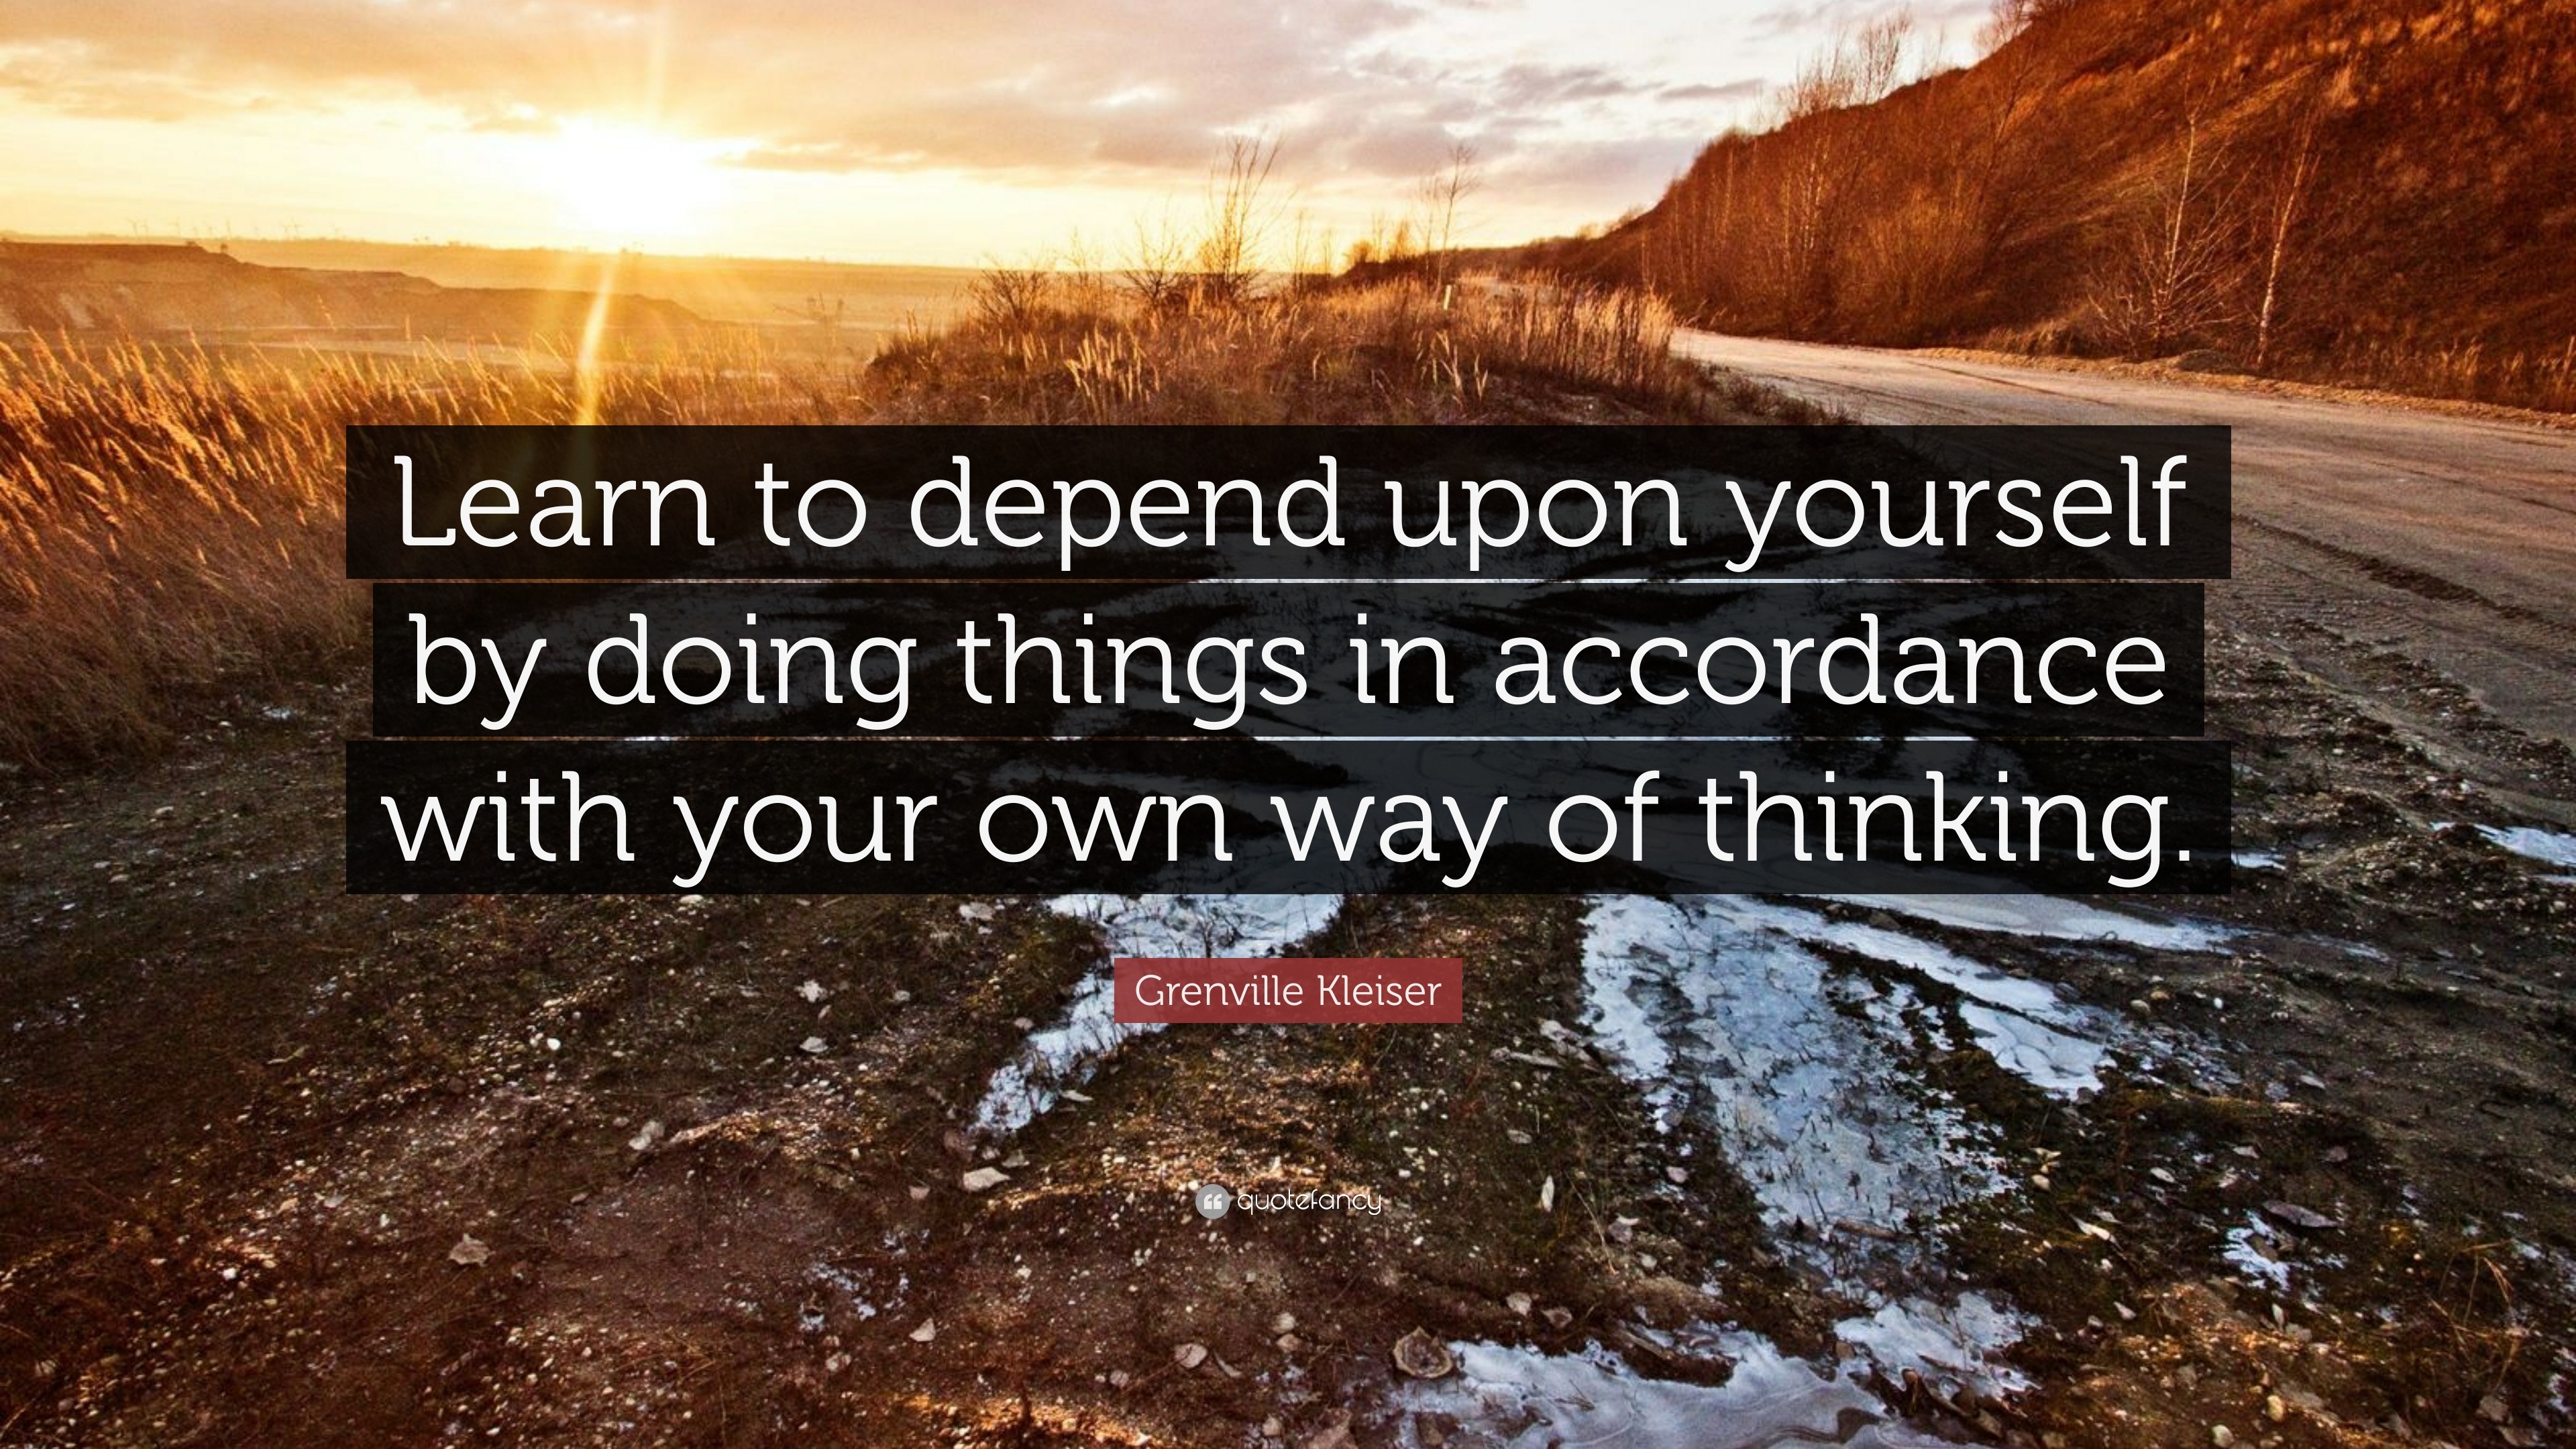 Grenville Kleiser Quote: “Learn to depend upon yourself by doing things ...